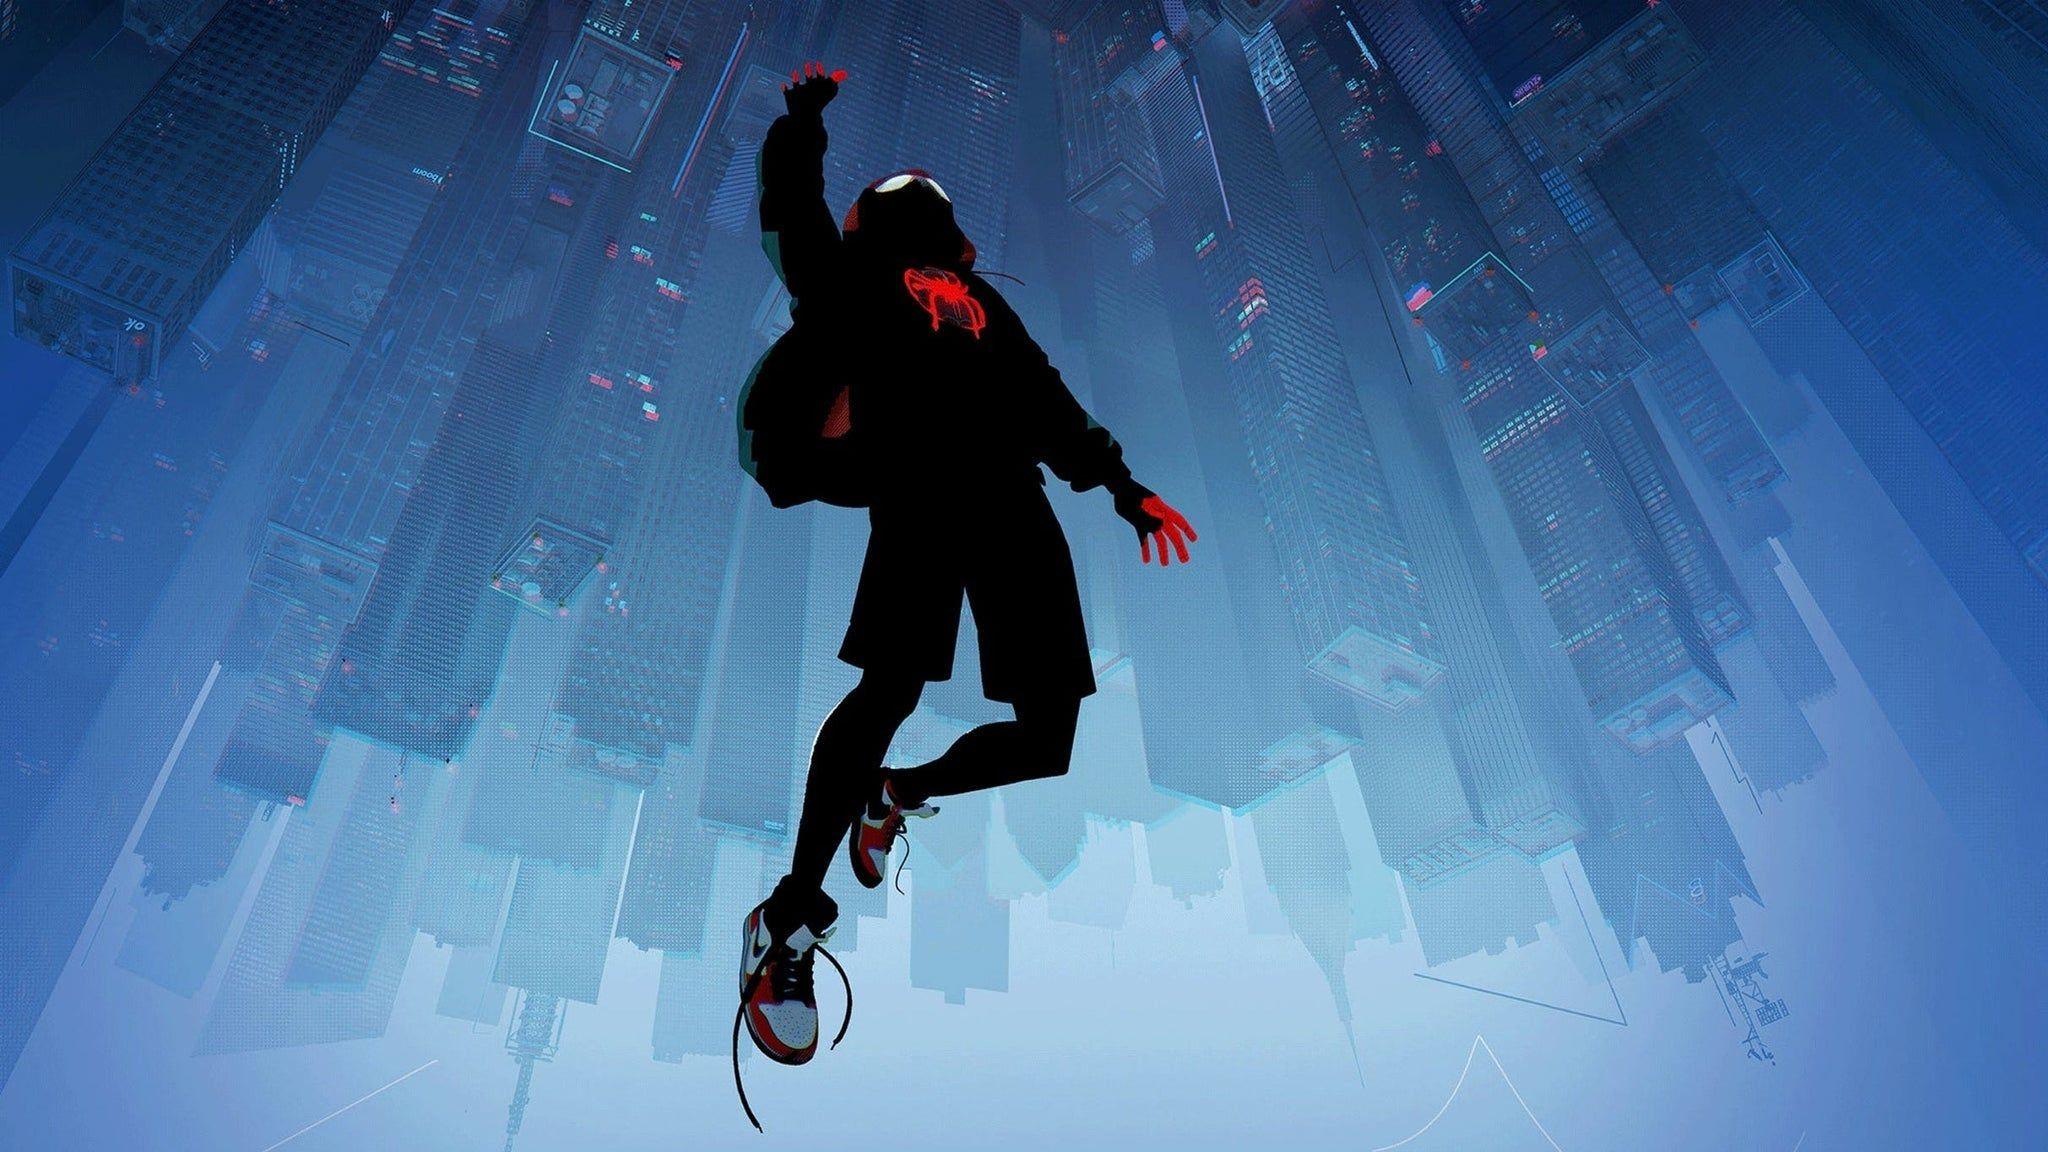 Spider-Man: Into the Spider-Verse Live in Concert (Touring)